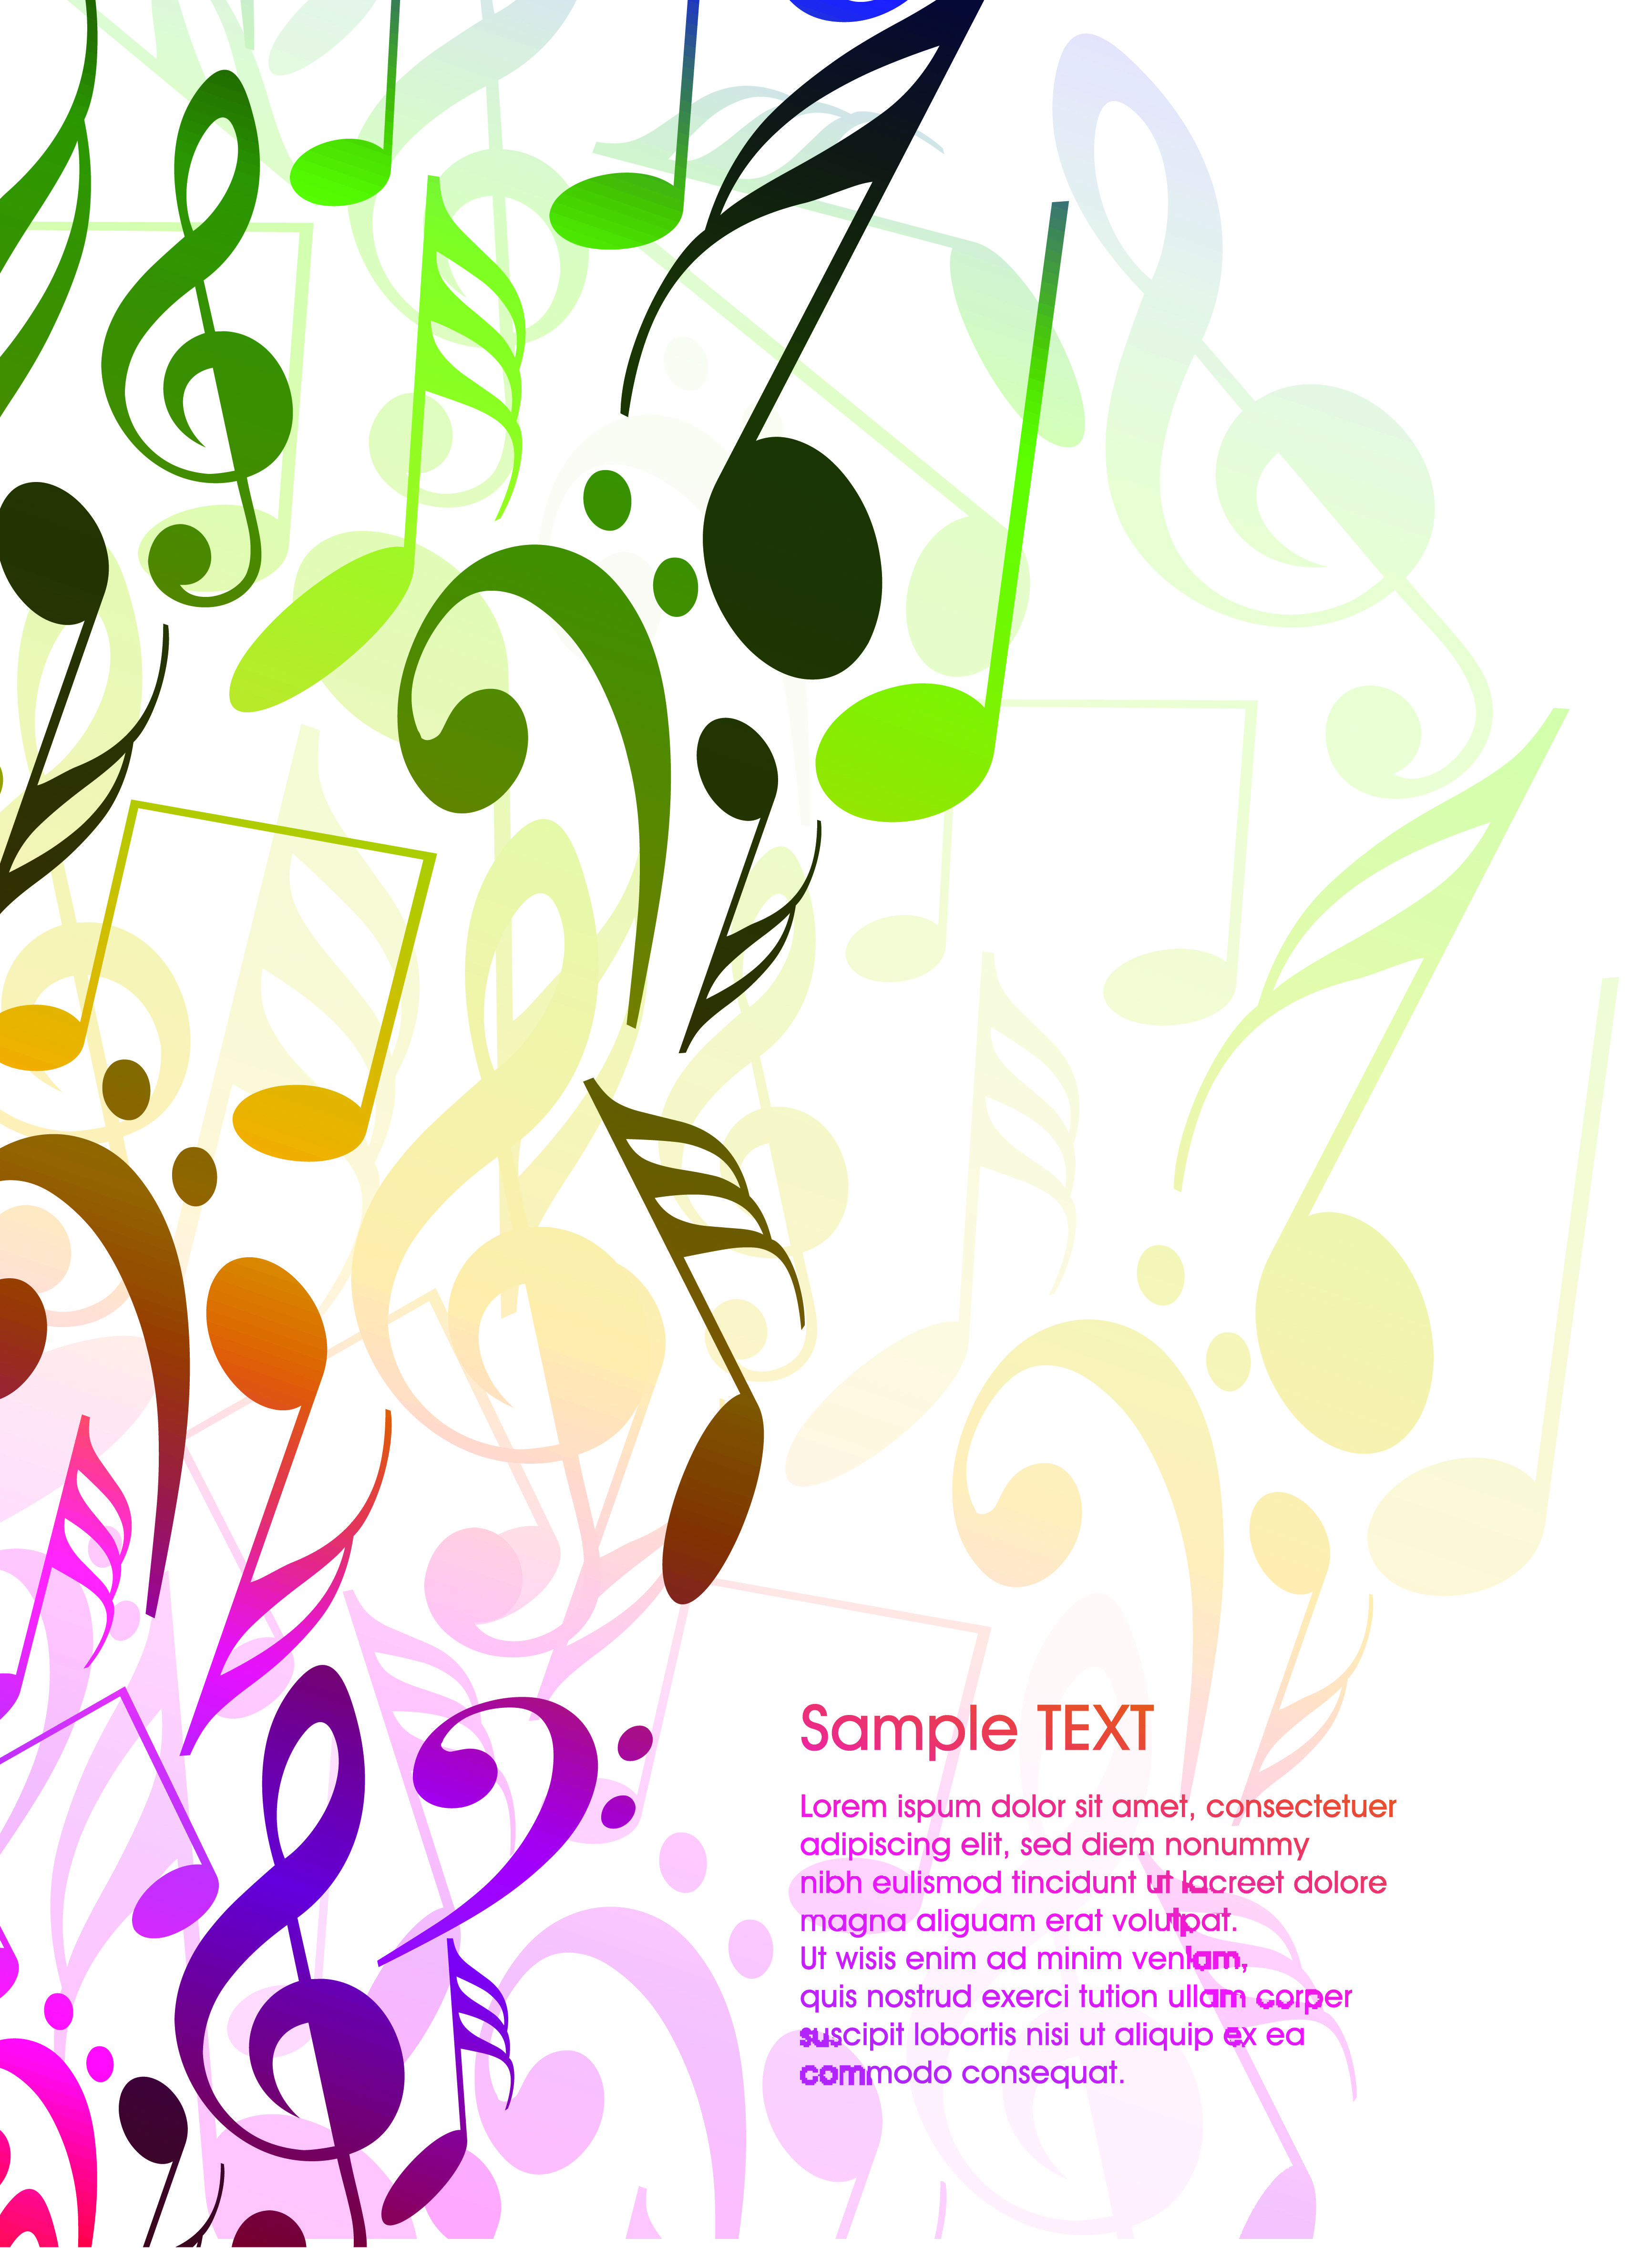 Background musical elements vector Free Vector / 4Vector